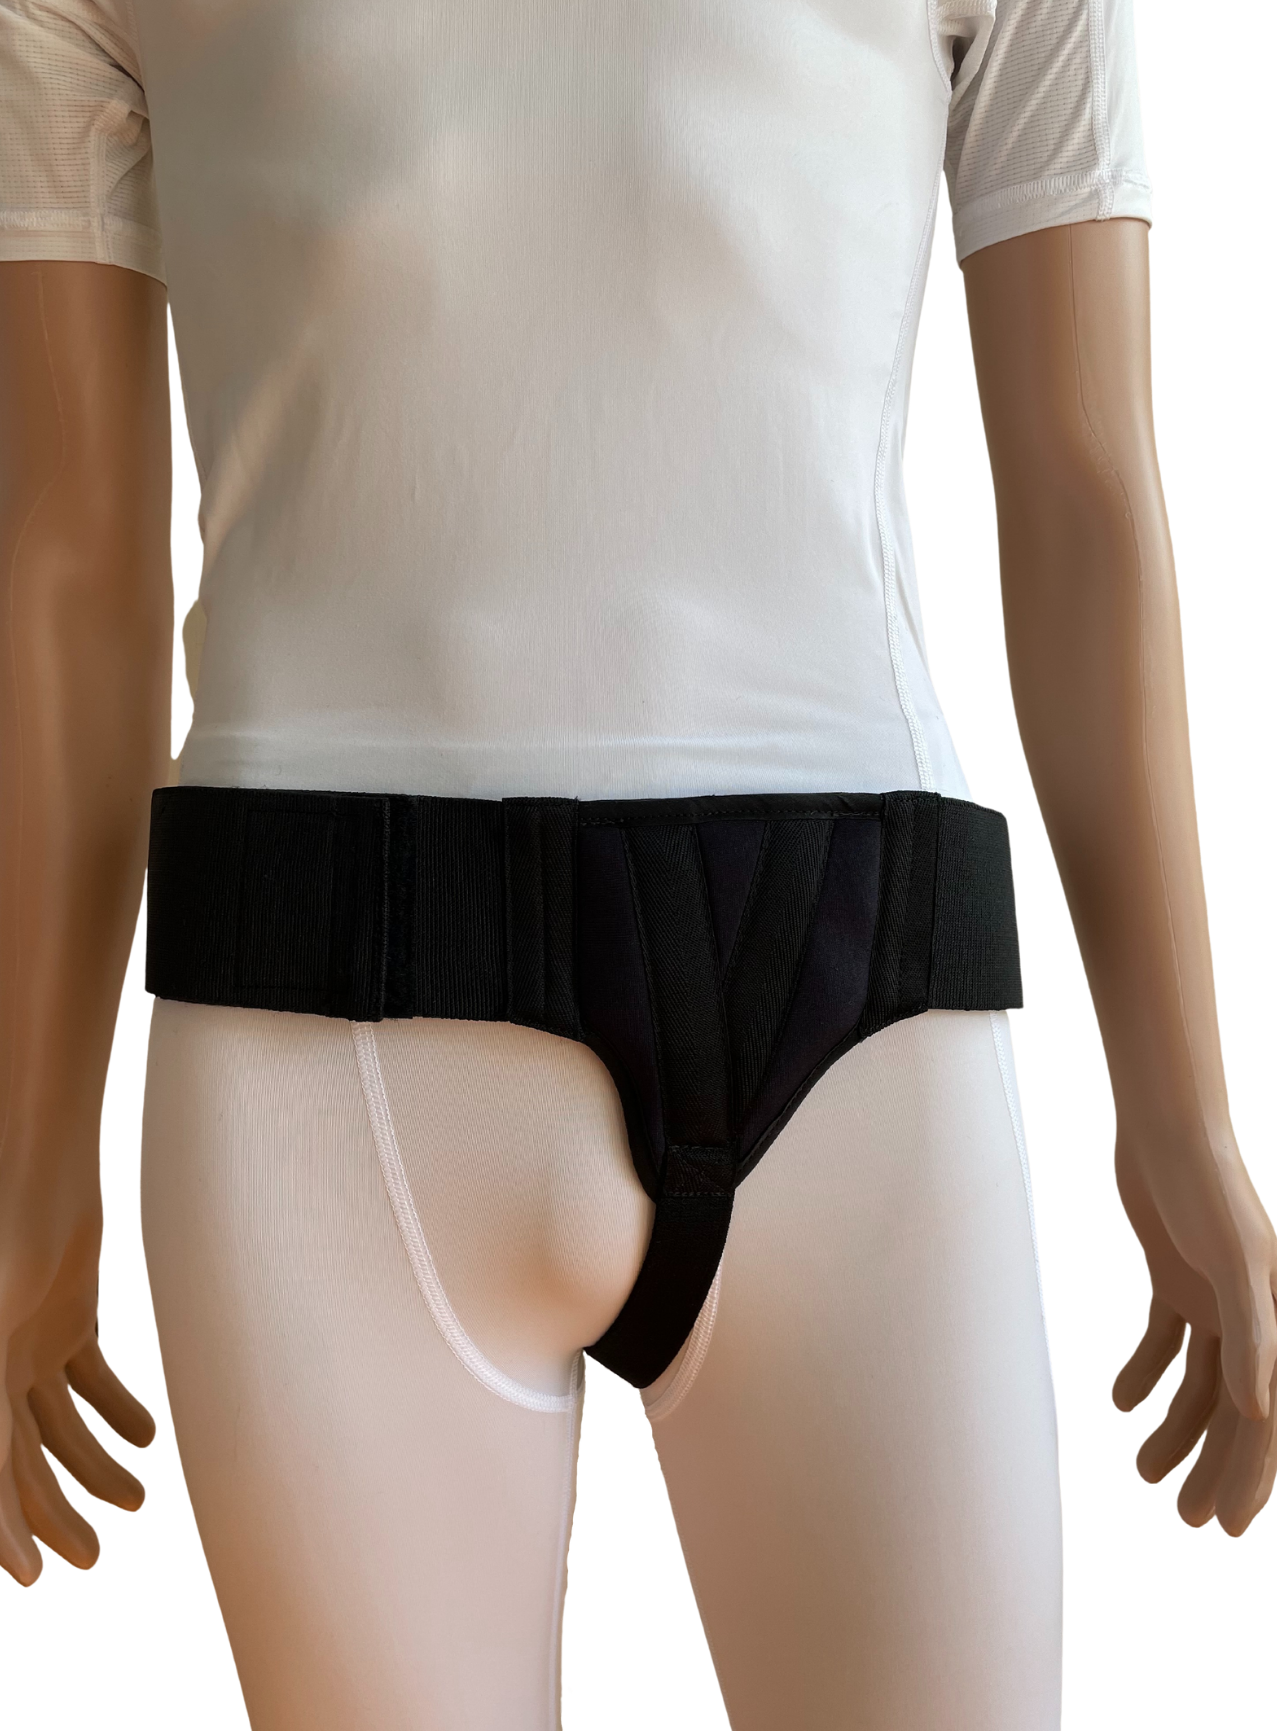 Inguinal Hernia Support Belt Invisible Underpants Compression Garment Truss  Galess (Black, XS)